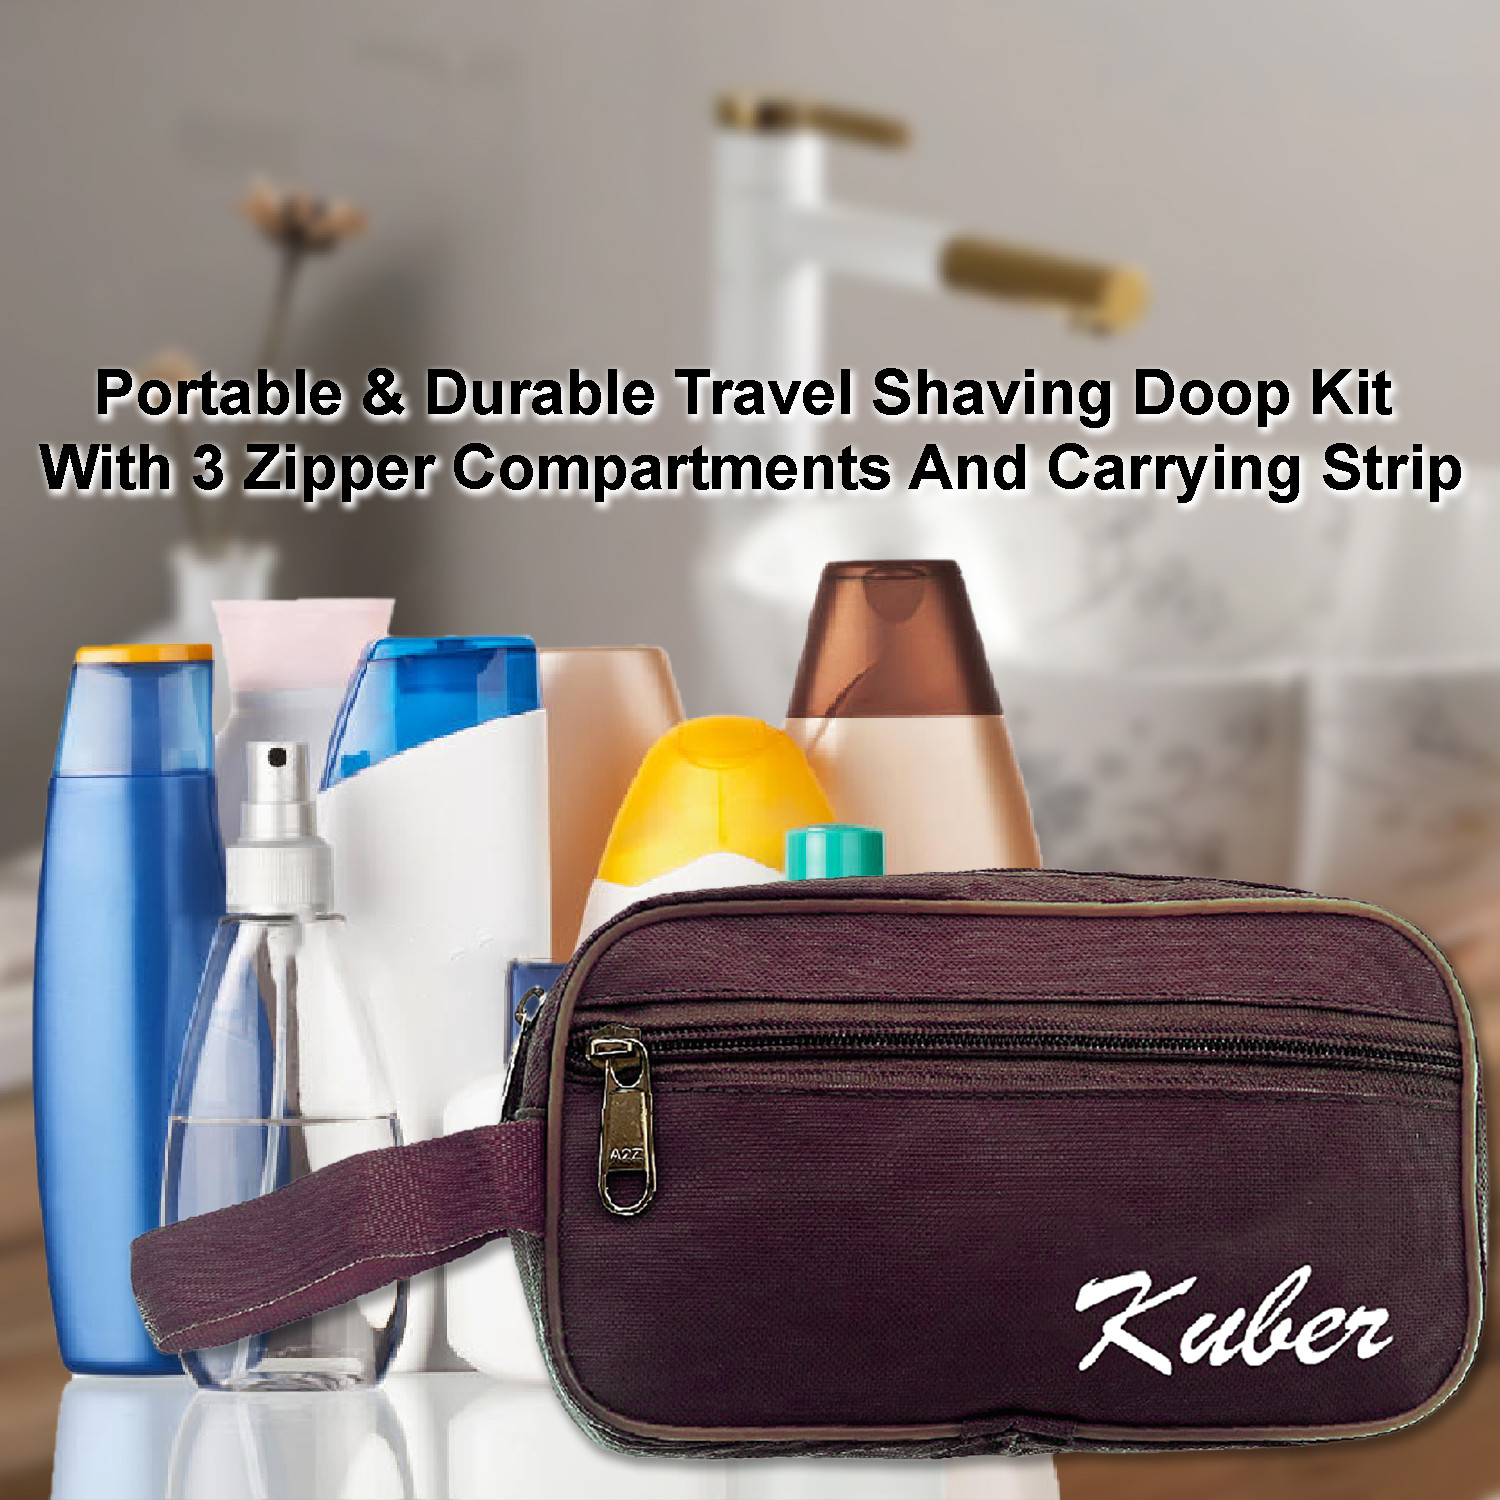 Kuber Industries Canvas Toiletry Organizer|Waterproof & Portable Travel Shaving Dopp Kit With 2 Main ComparMants And Front Zipper (Brown)